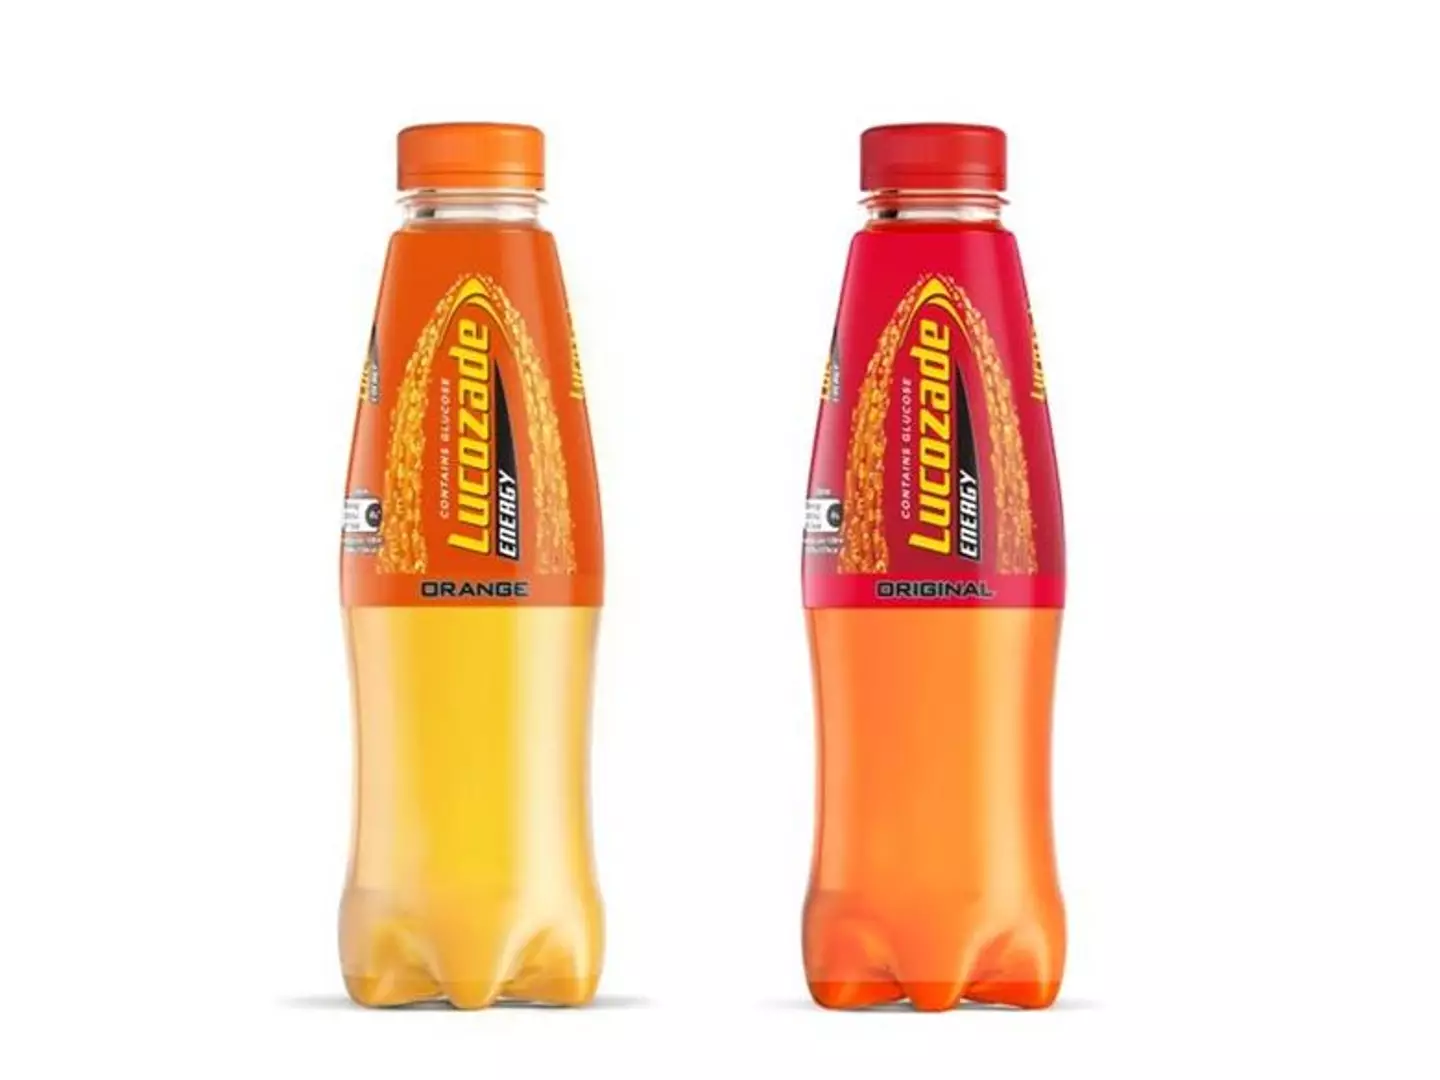 Lucozade has been given a new look.